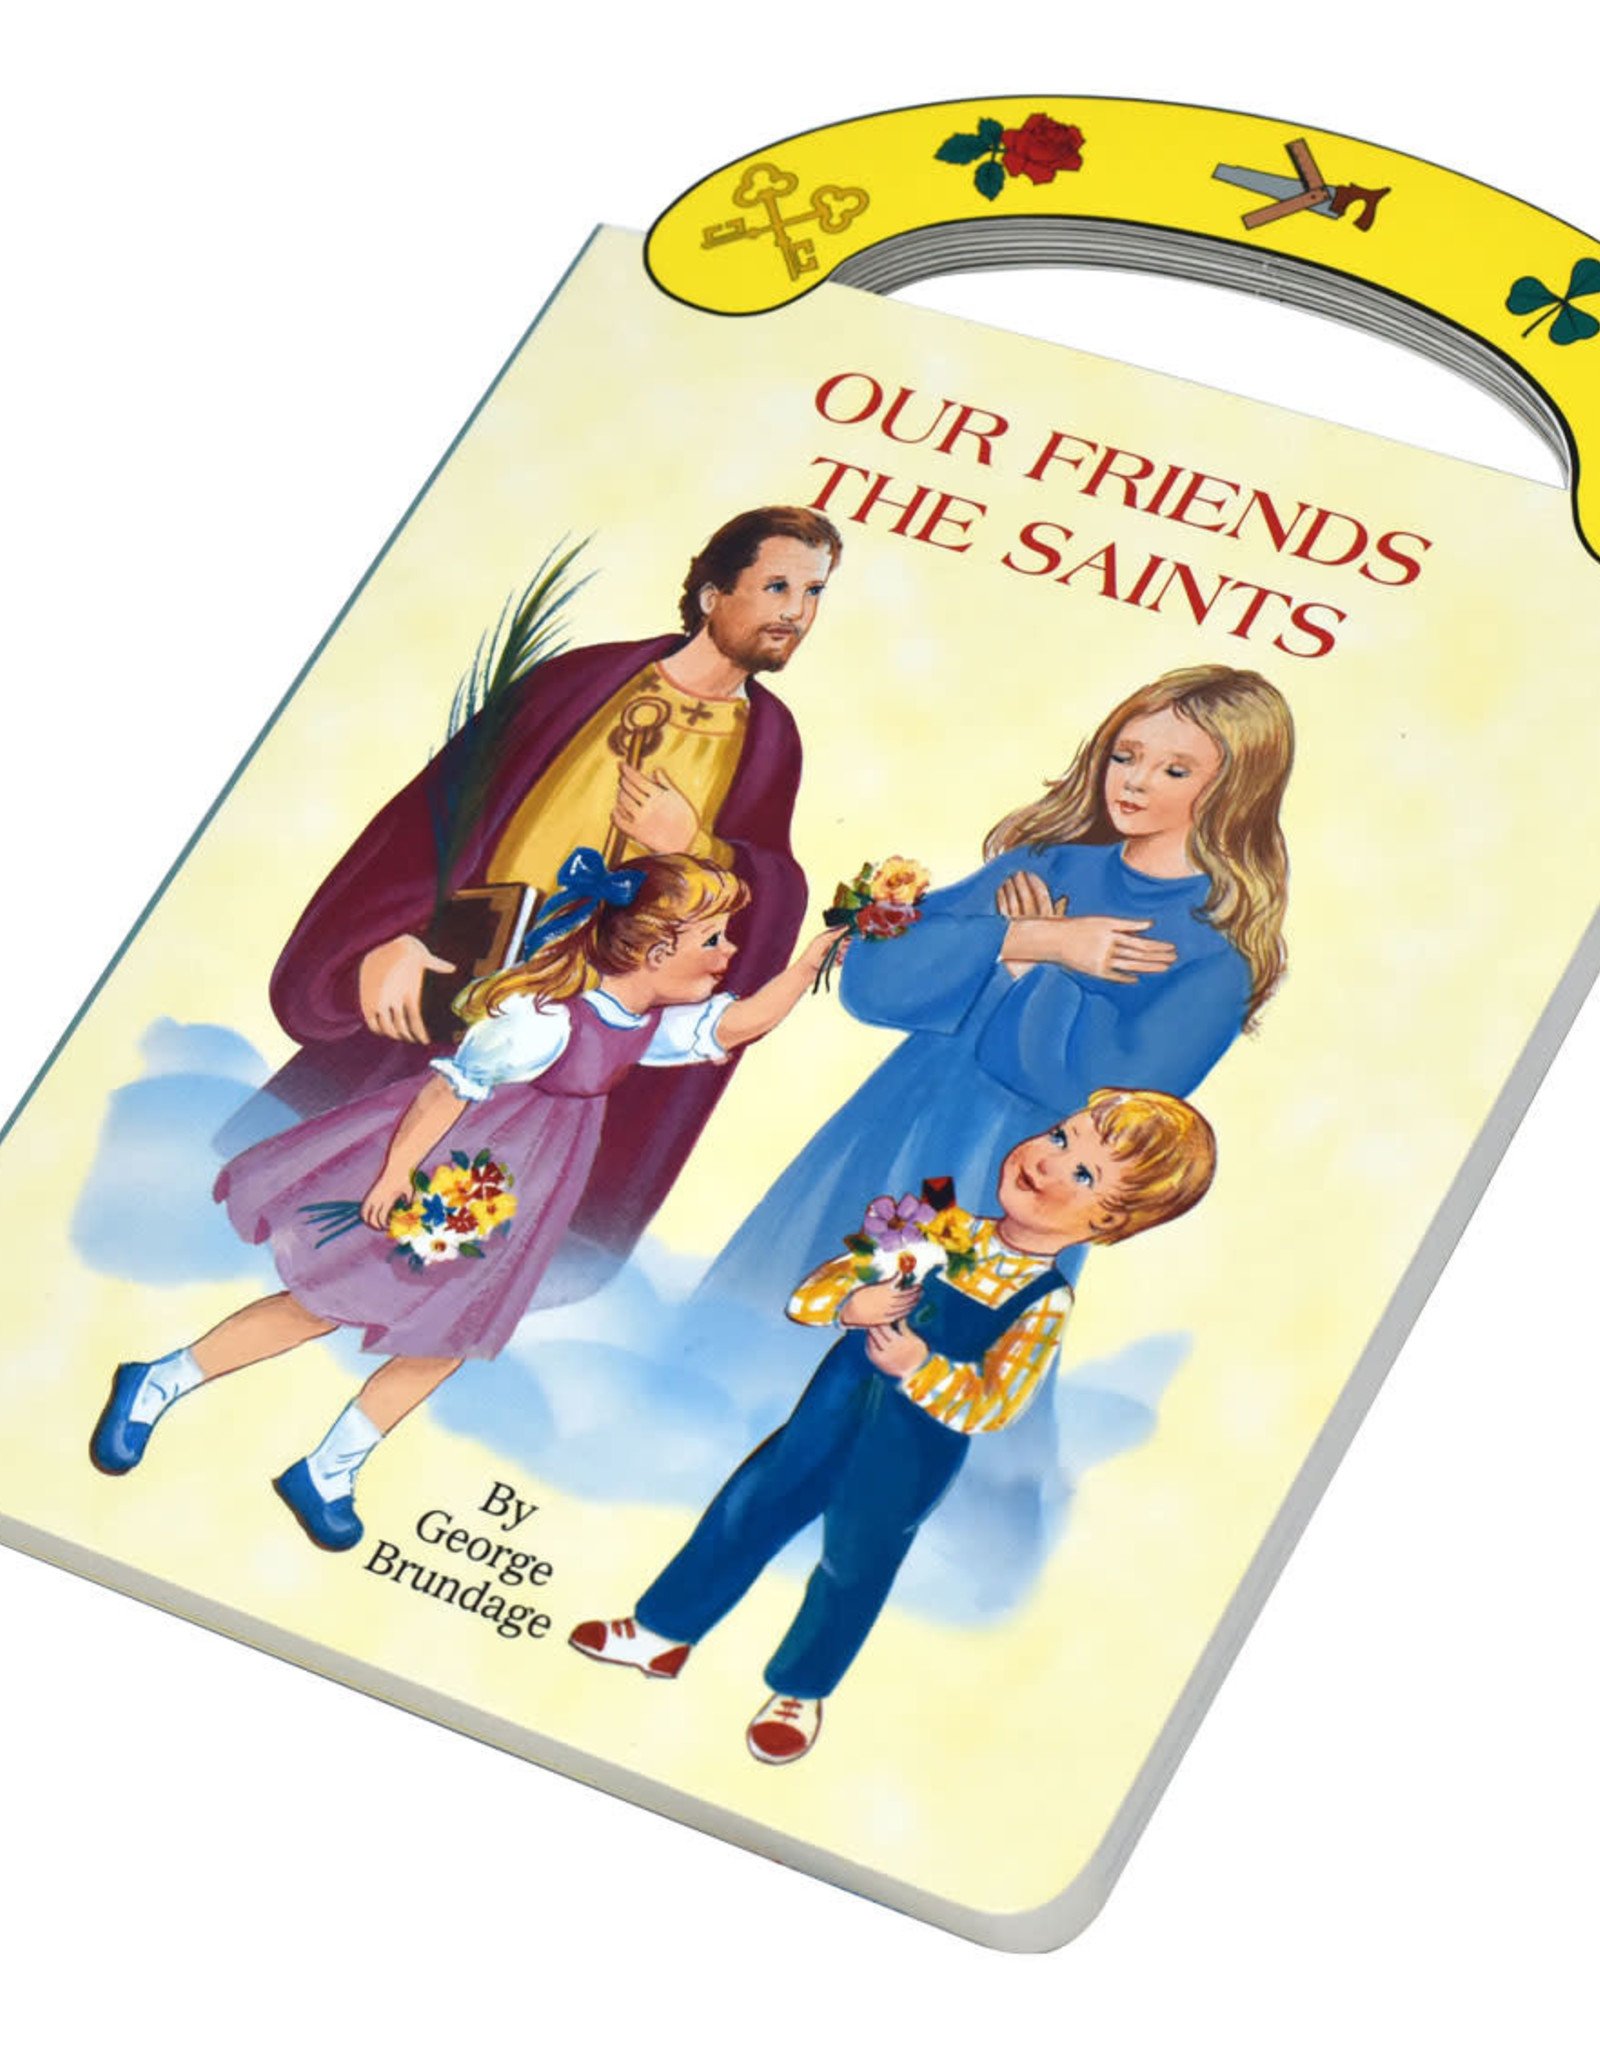 Catholic Book Publishing Our Friends the Saints (St. Joseph "Carry-Me-Along" Board Book), by George Brundage